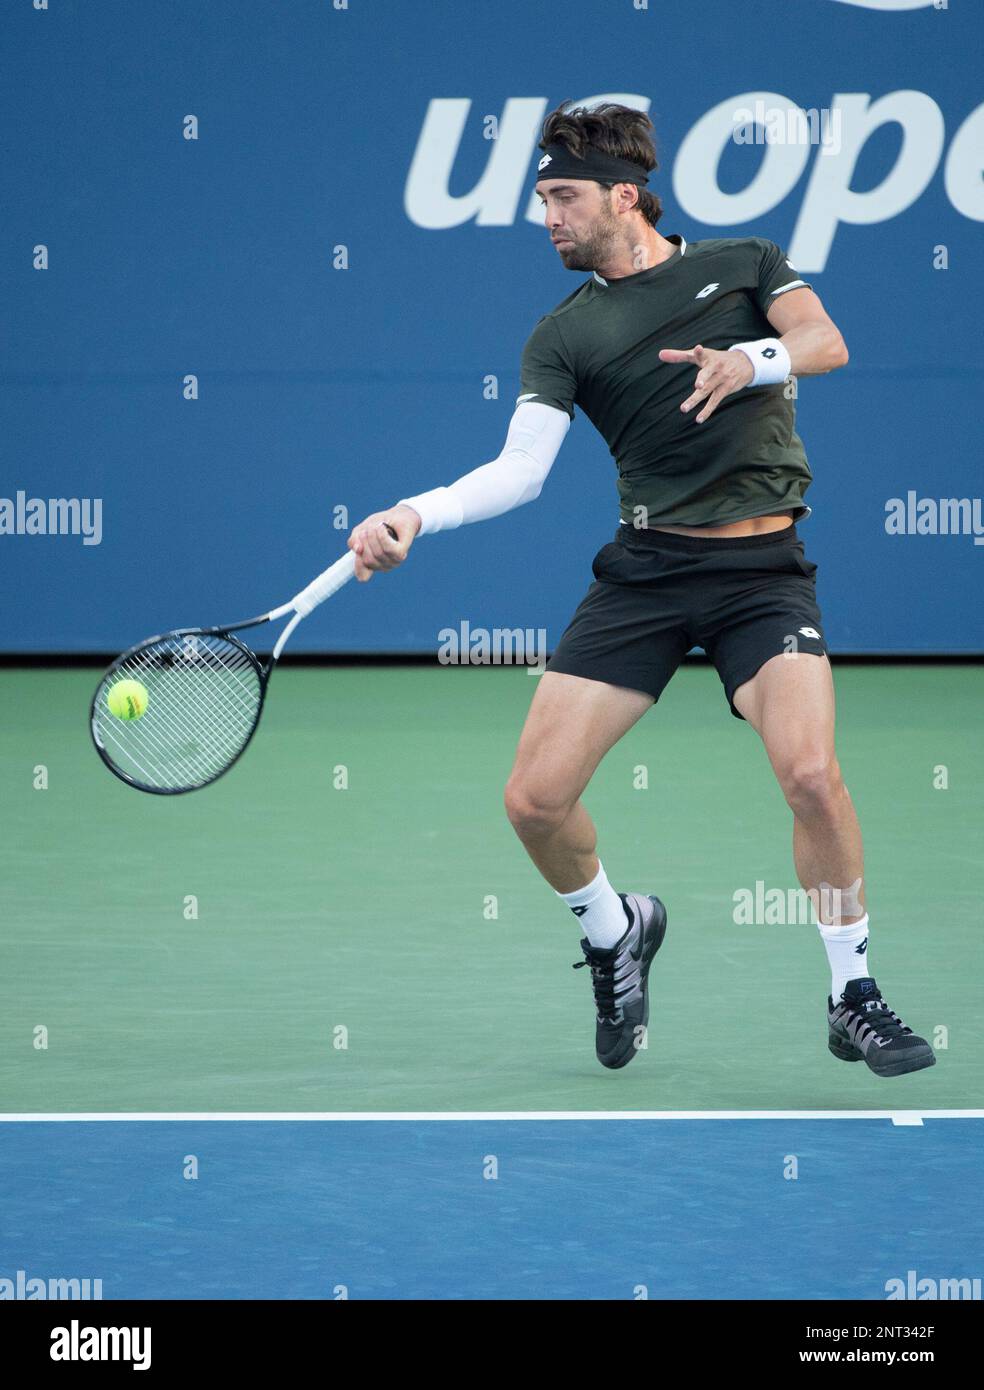 August 30,2019 Nikoloz Basilashvili (GEO) loses to Dominik Koepfer (GER) 6-3, 7-6, 4-6, 6-1, at the US Open being played at Billie Jean King National Tennis Center in Flushing, Queens, NY